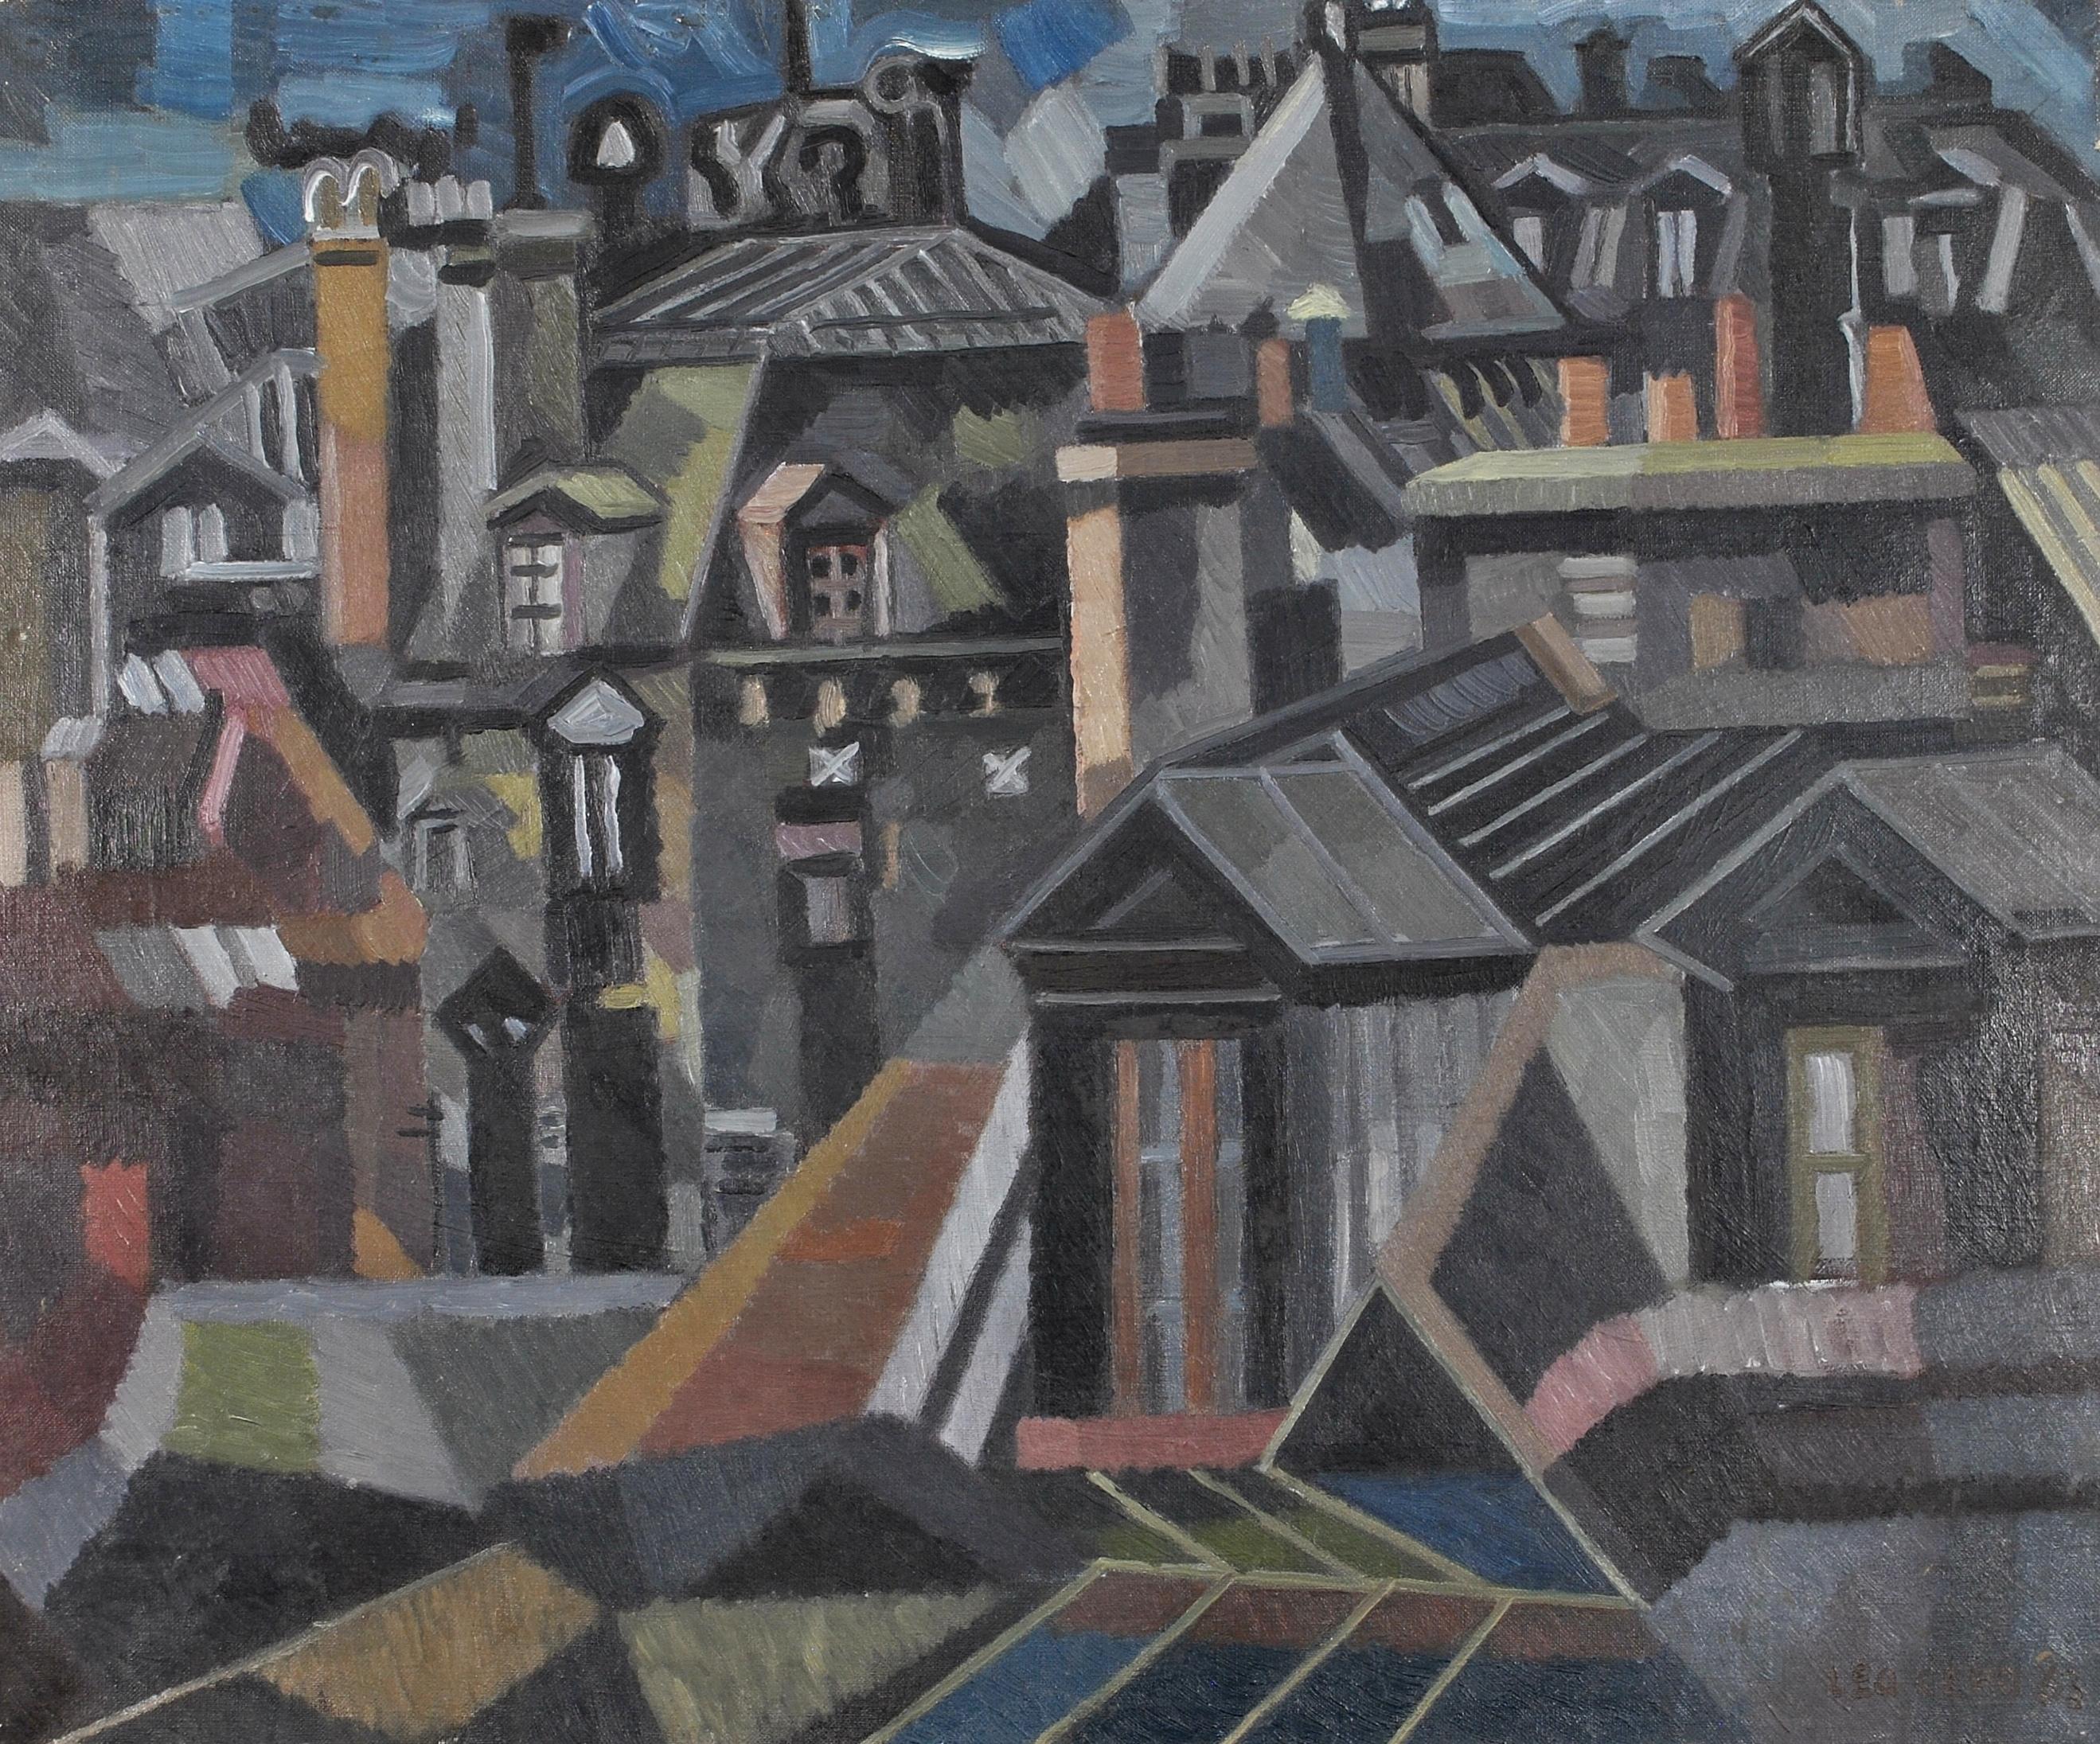 Mid 20th Century French School Landscape Painting - Paris Rooftops - Mid 20th Century French France Cubist Oil on Canvas Painting